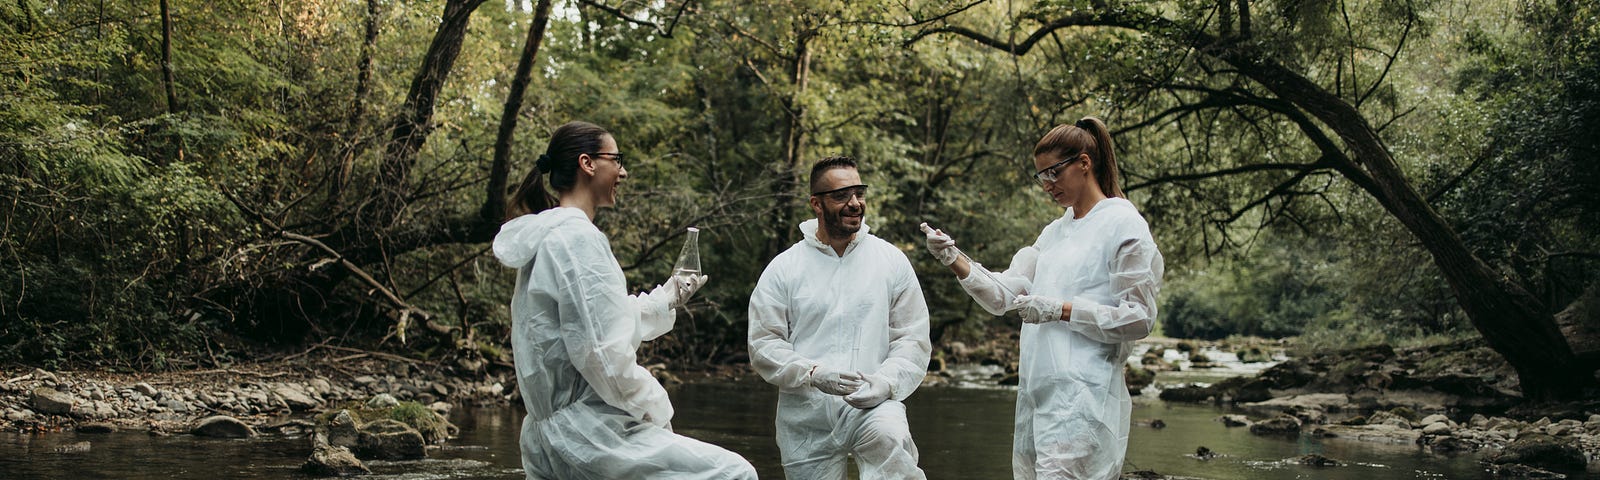 Three people in protective suits take water samples from a shallow river in a green forest.